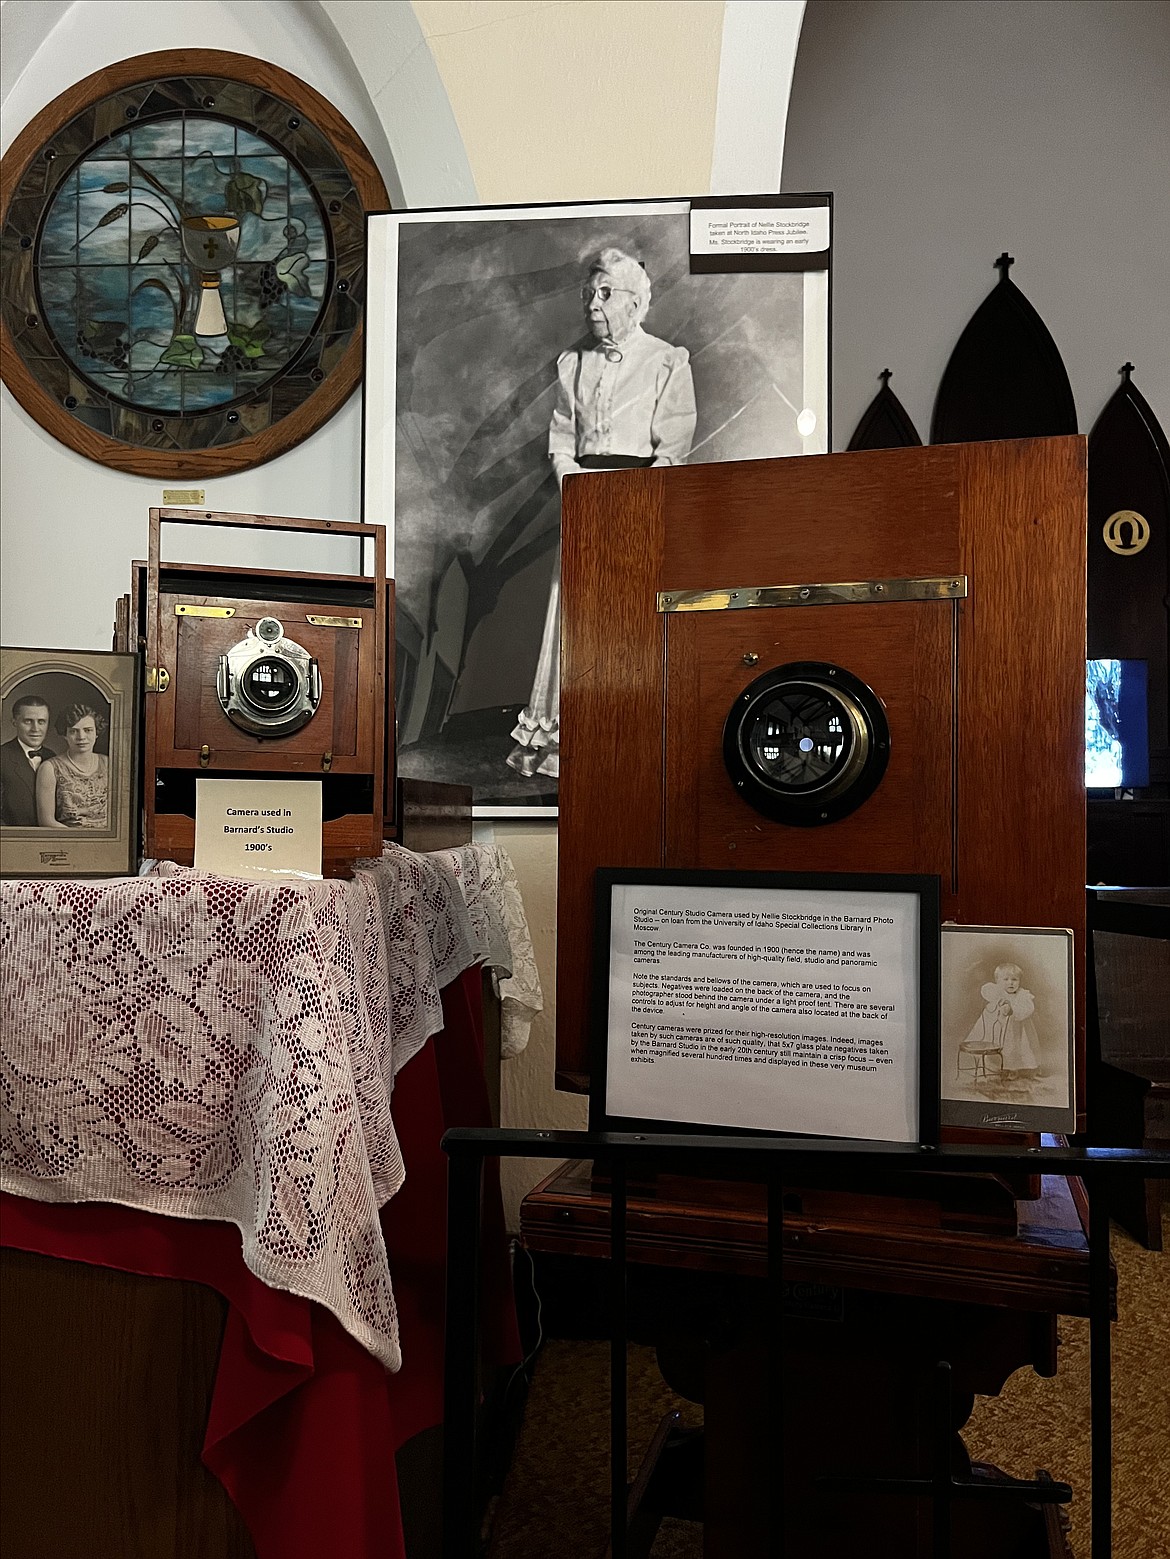 These cameras, used by Nellie Stockbridge and T.N. Barnard in their Wallace studio, are on display at the Barnard-Stockbridge Museum. Stockbridge can be seen pictured in the background.